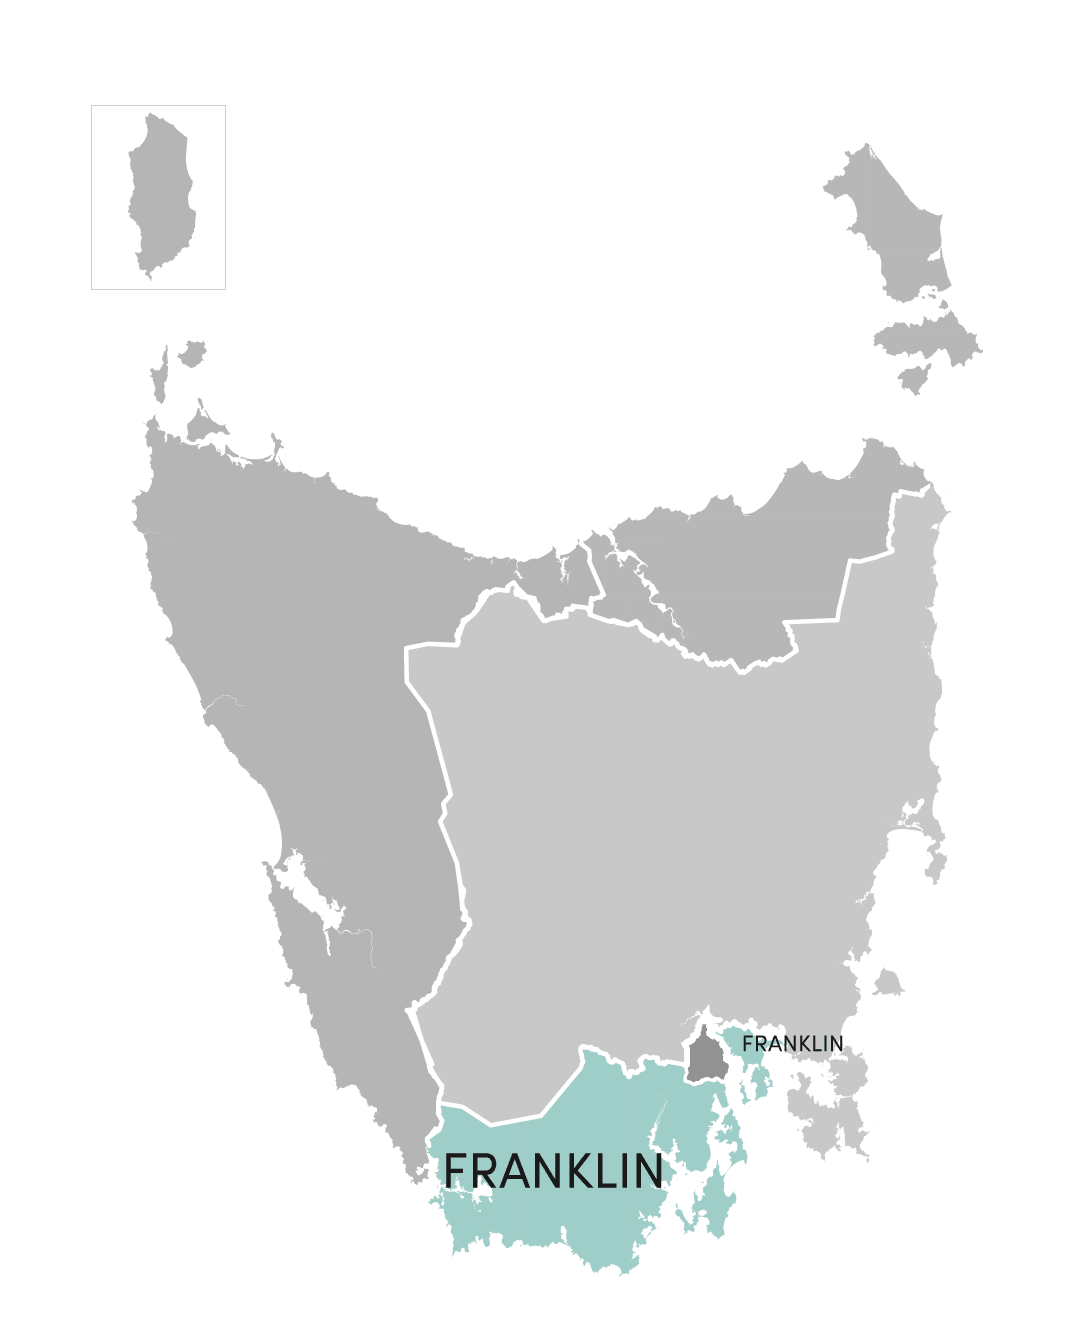 Franklin division highlighted on illustrated map of Tasmania